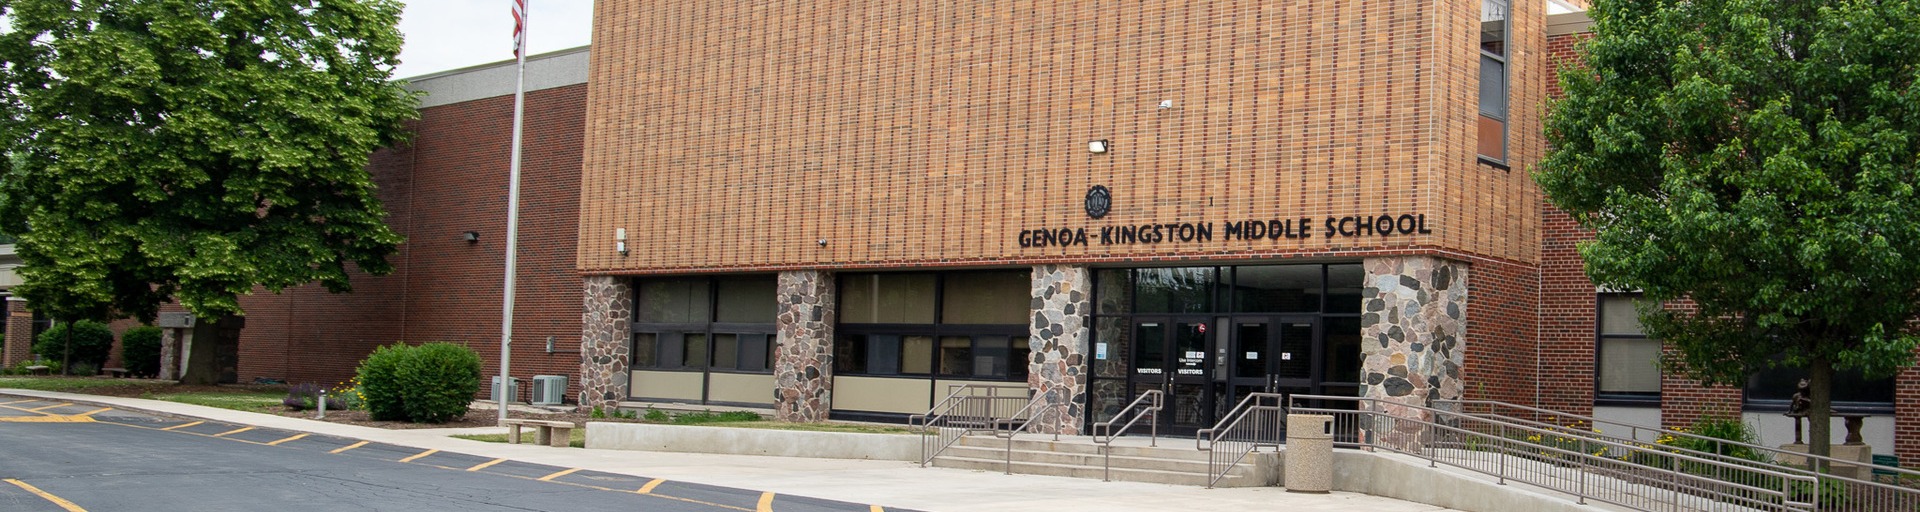 GKMS building